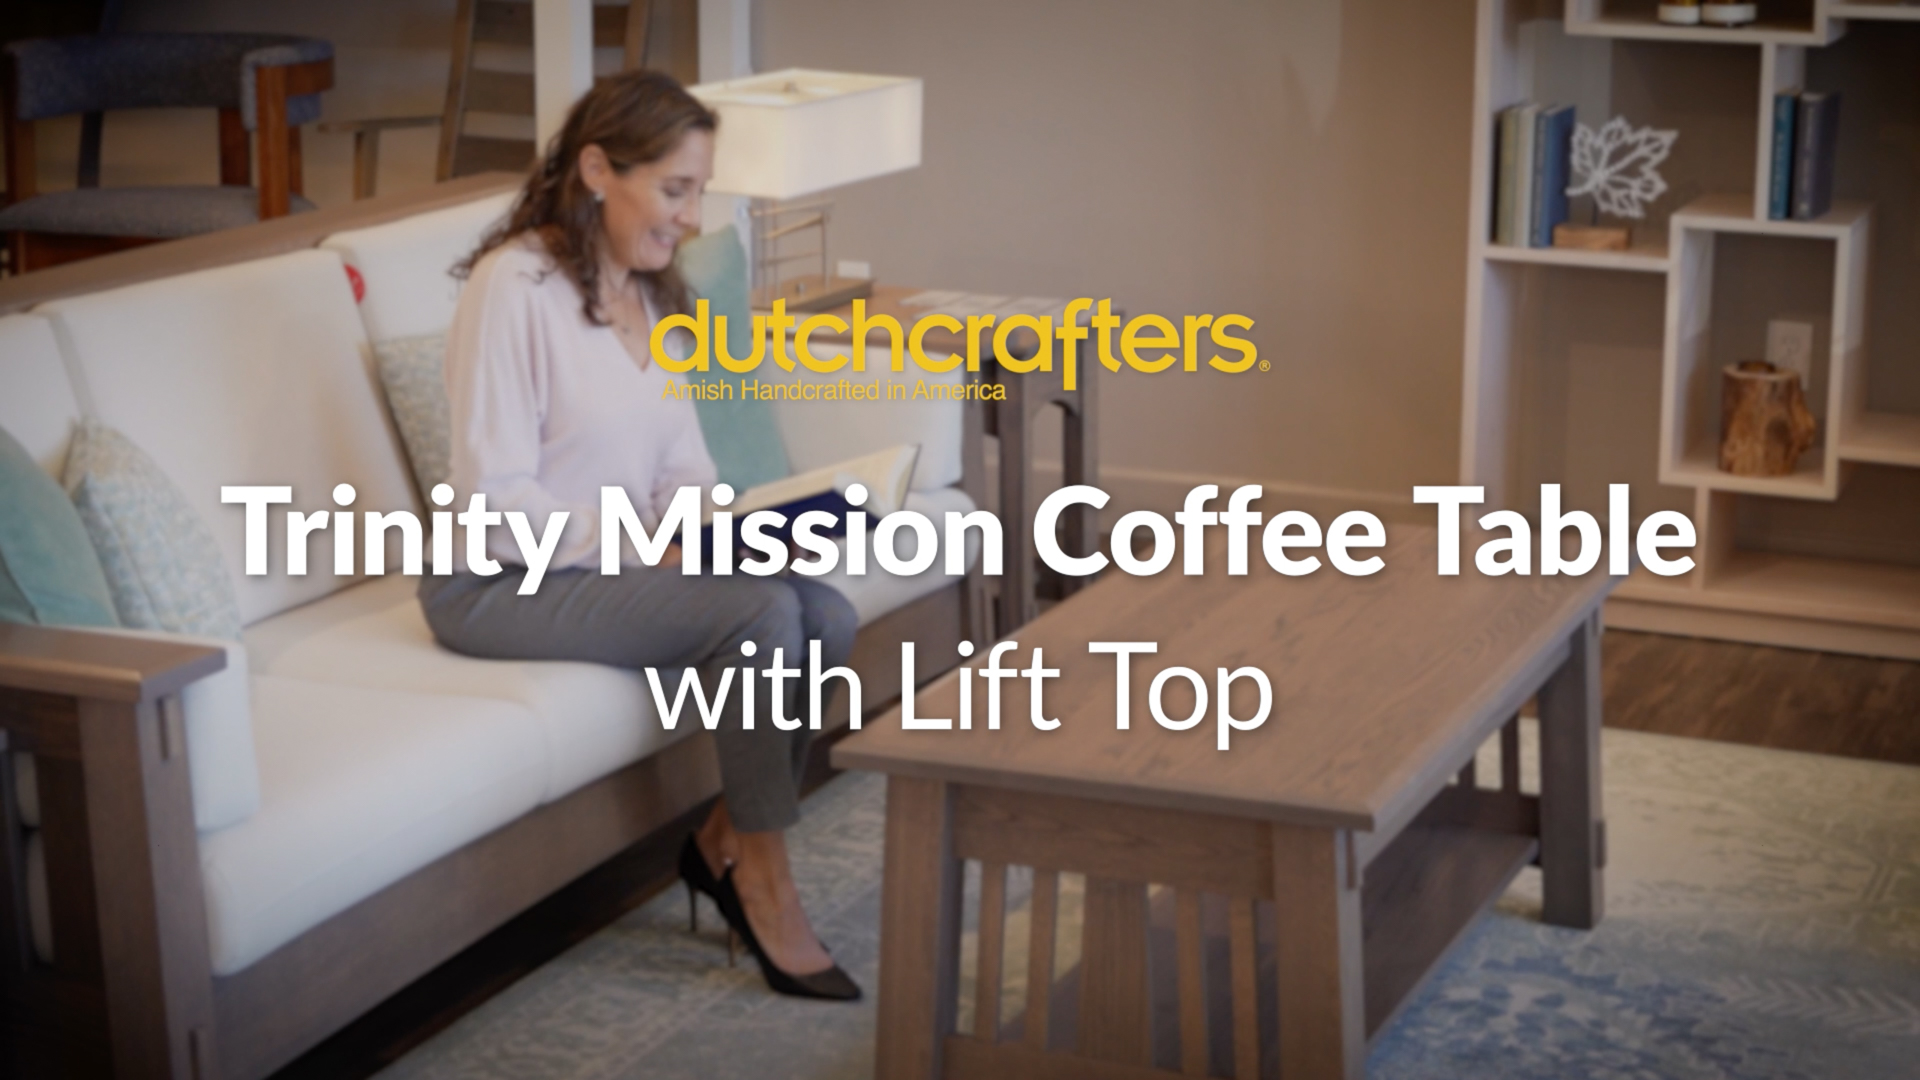 Video title image named "Amish Trinity Mission Coffee Table with Lift Top"